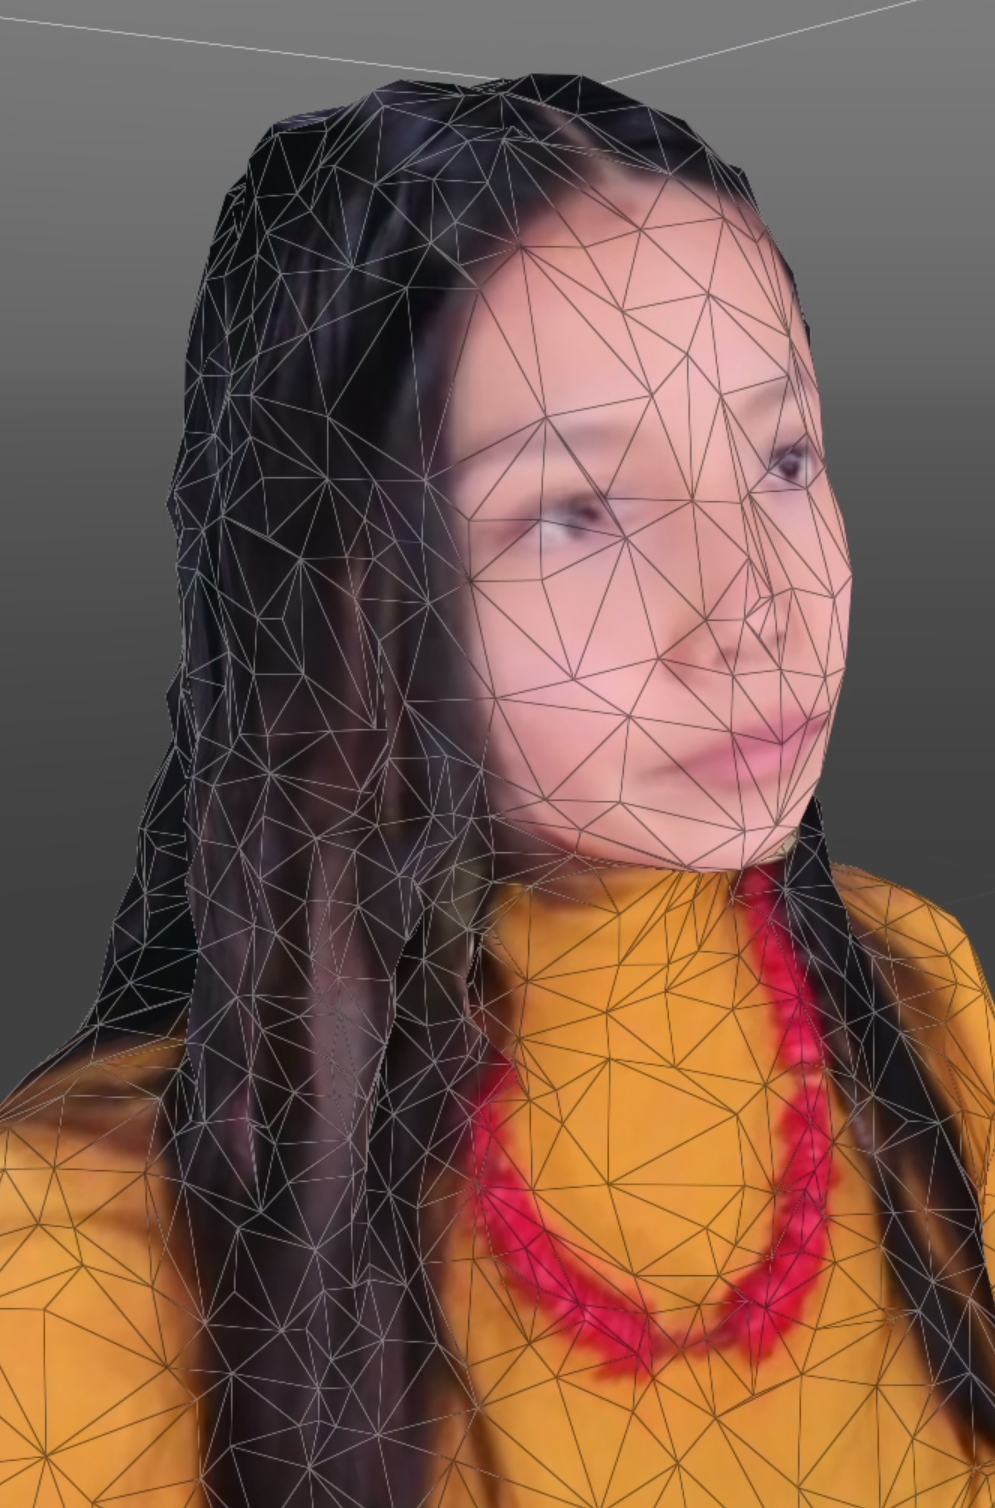 Mesh Simplification enabled. This mesh topology is determined by a combination of Mesh Density, Target Maximum Triangles, and Simplification Accuracy to generate a lower-poly mesh which is more optimized for streaming playback